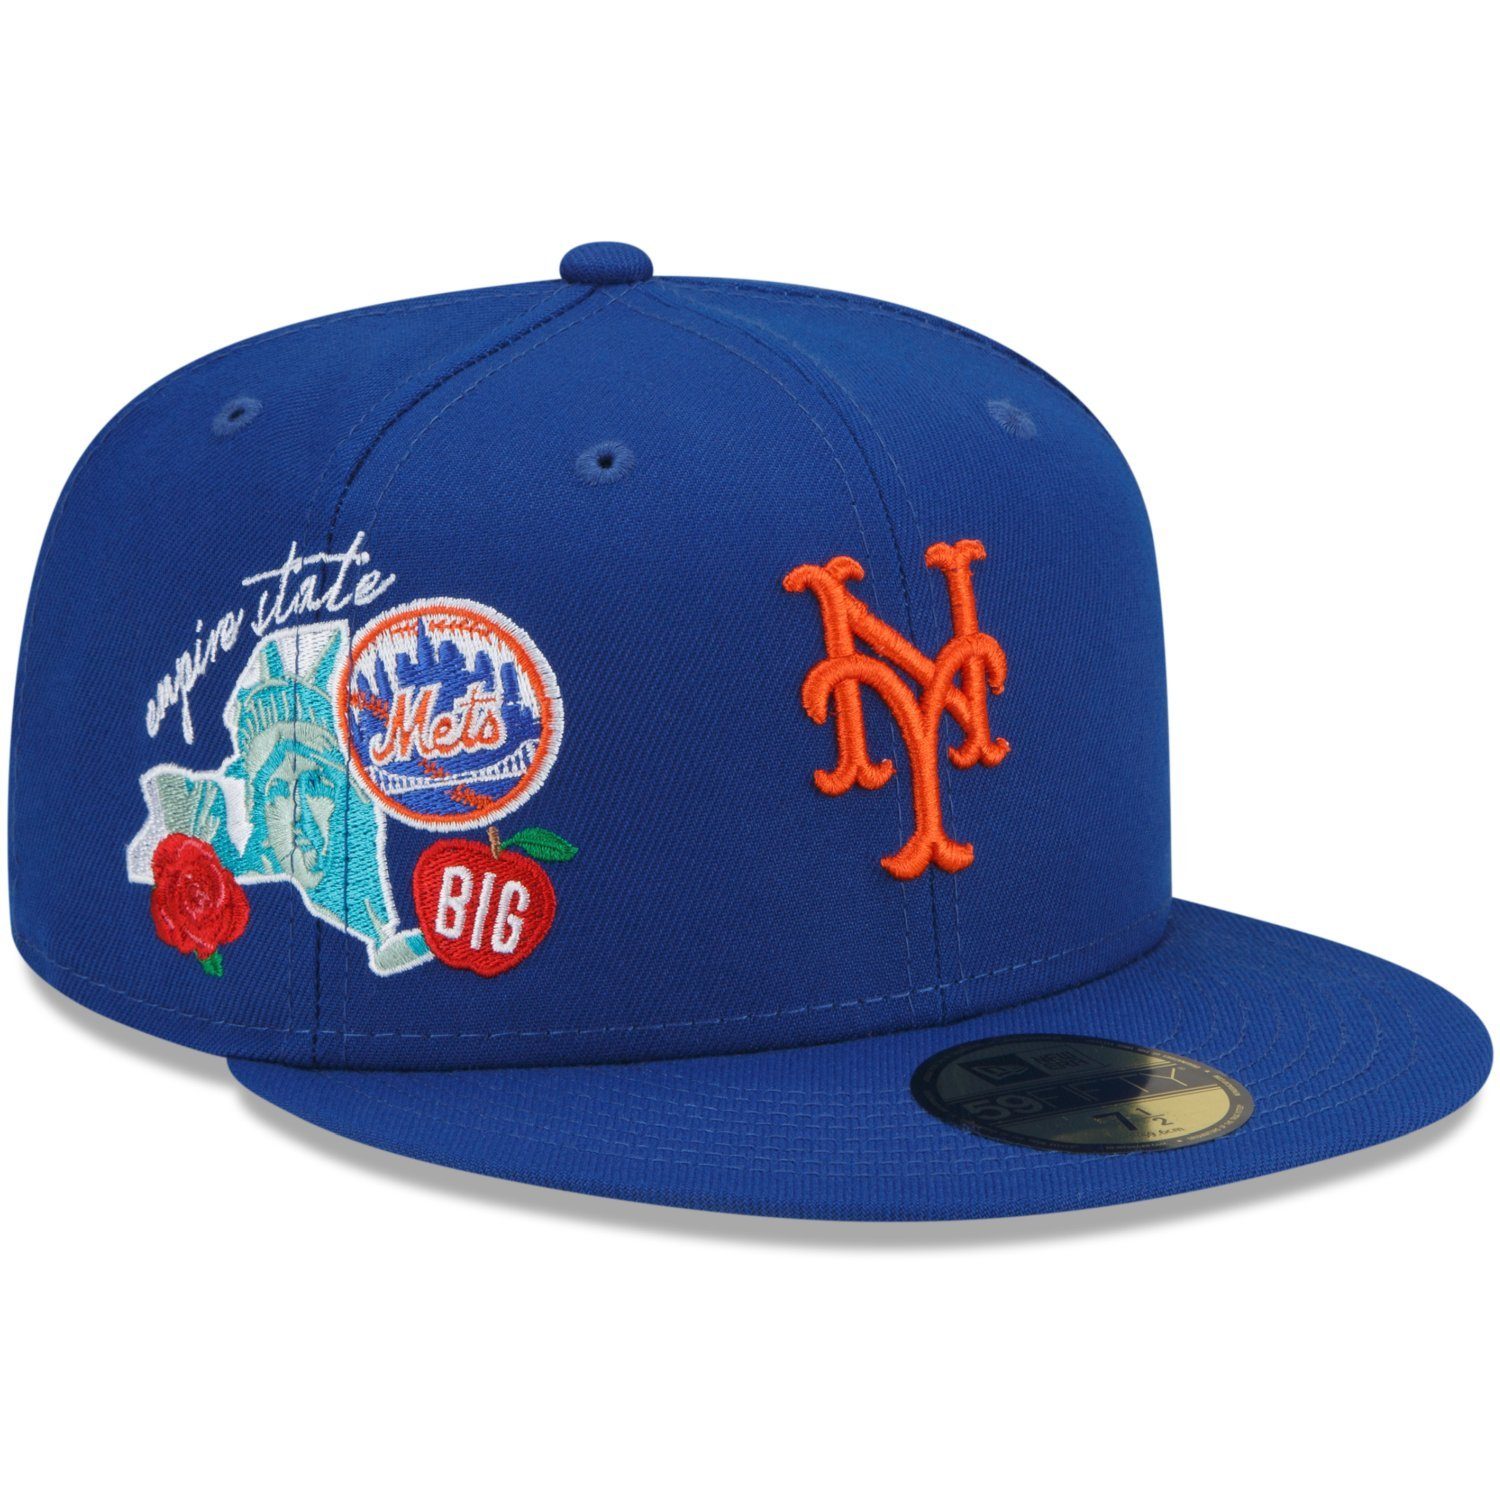 New Era Fitted Cap 59Fifty CITY CLUSTER New York Mets